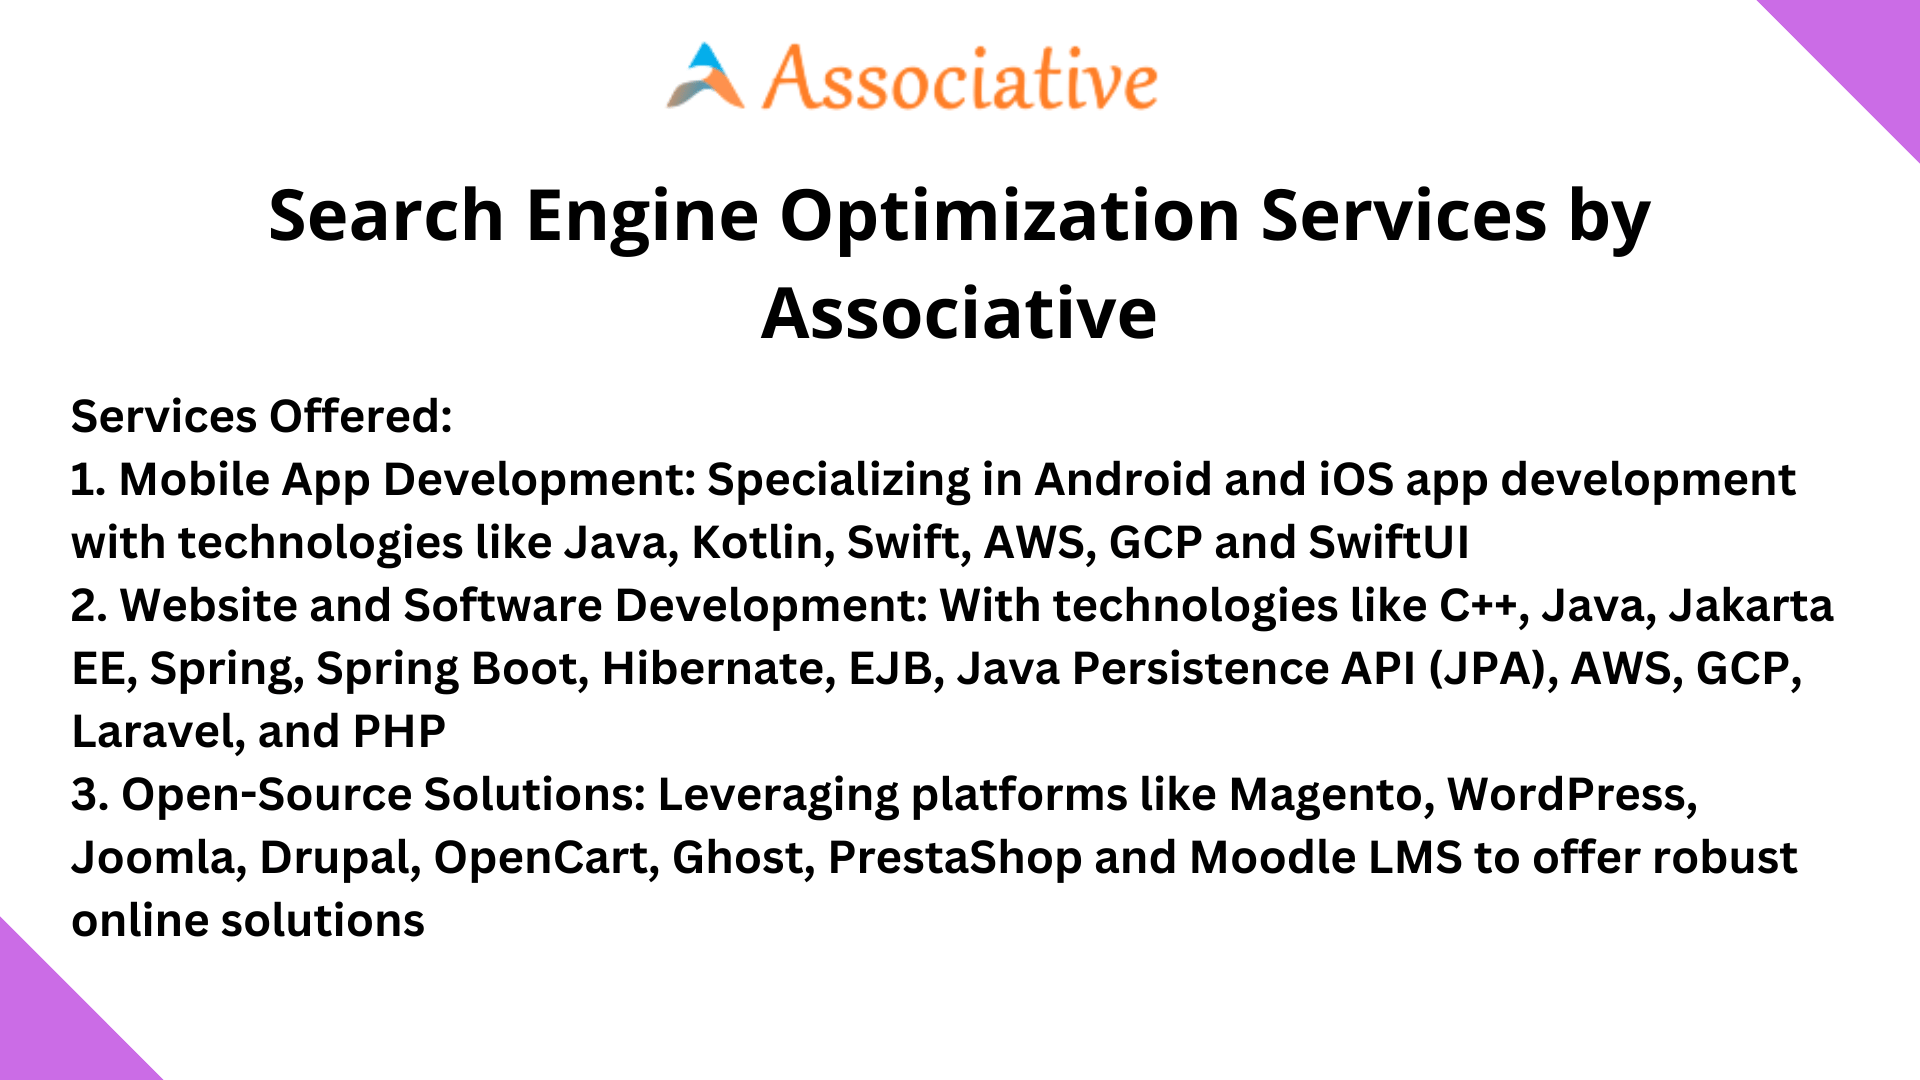 Search Engine Optimization Services by Associative